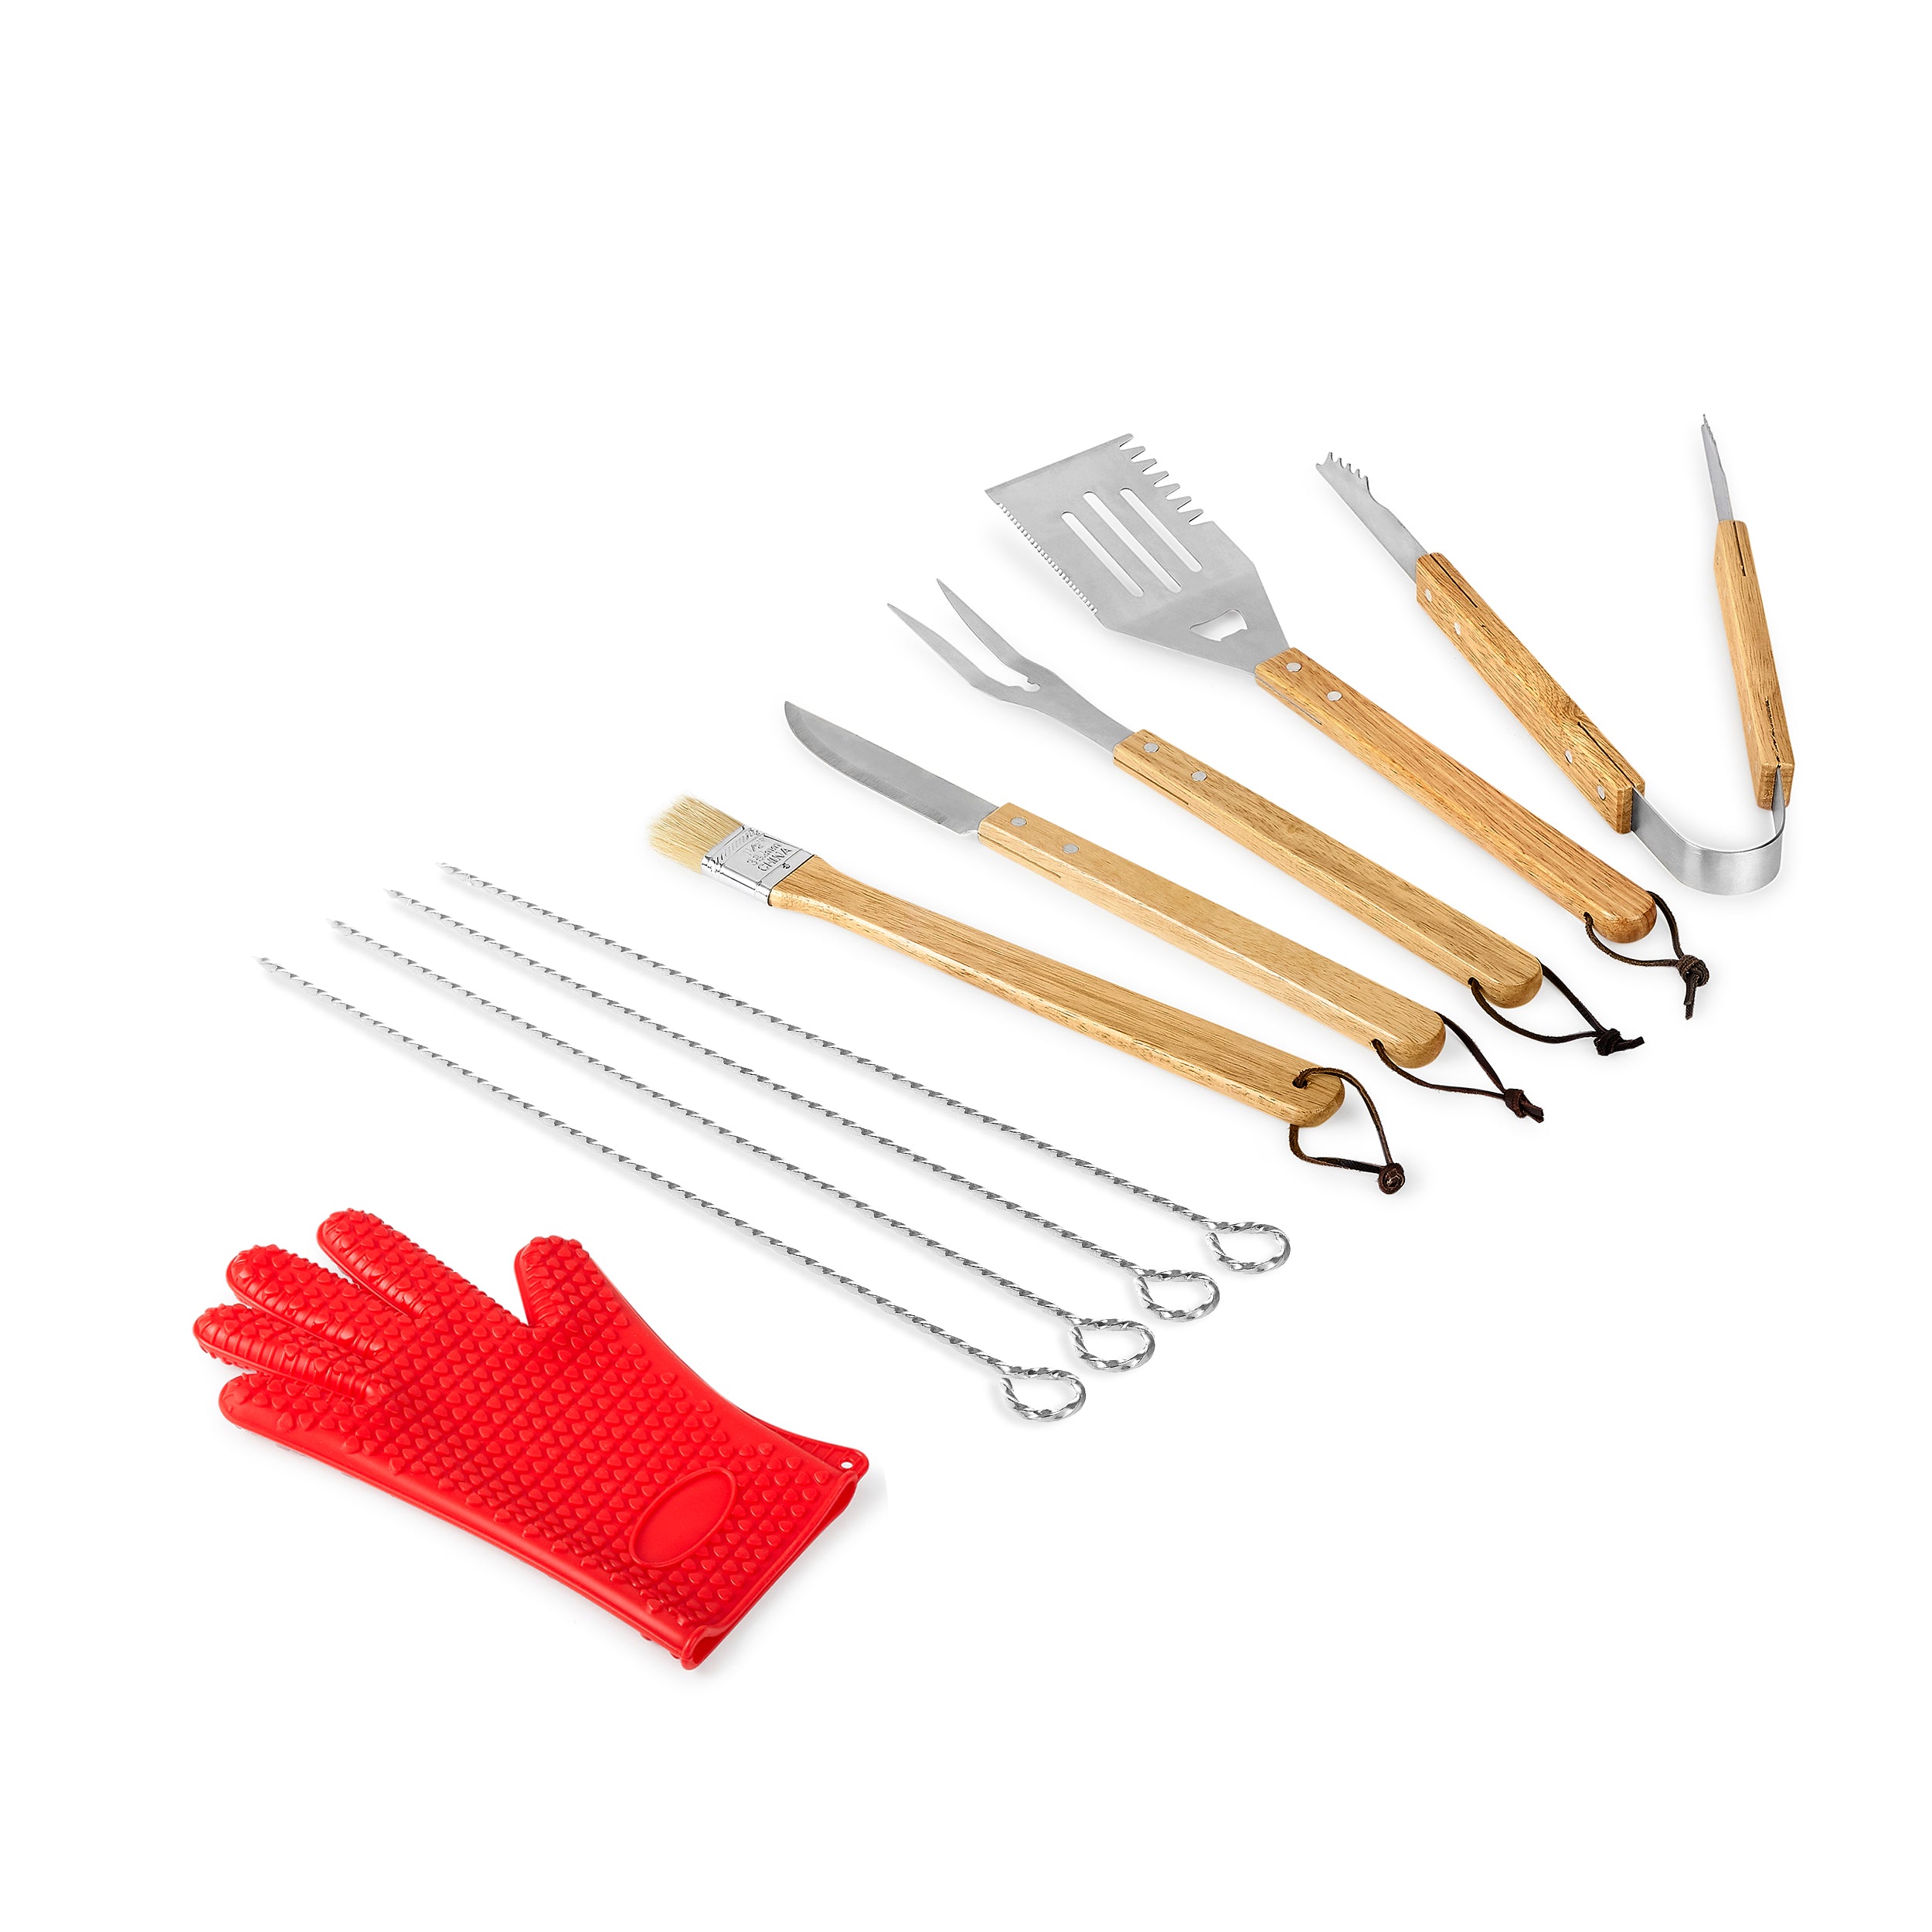 11 Piece BBQ Grill Set for BBQ